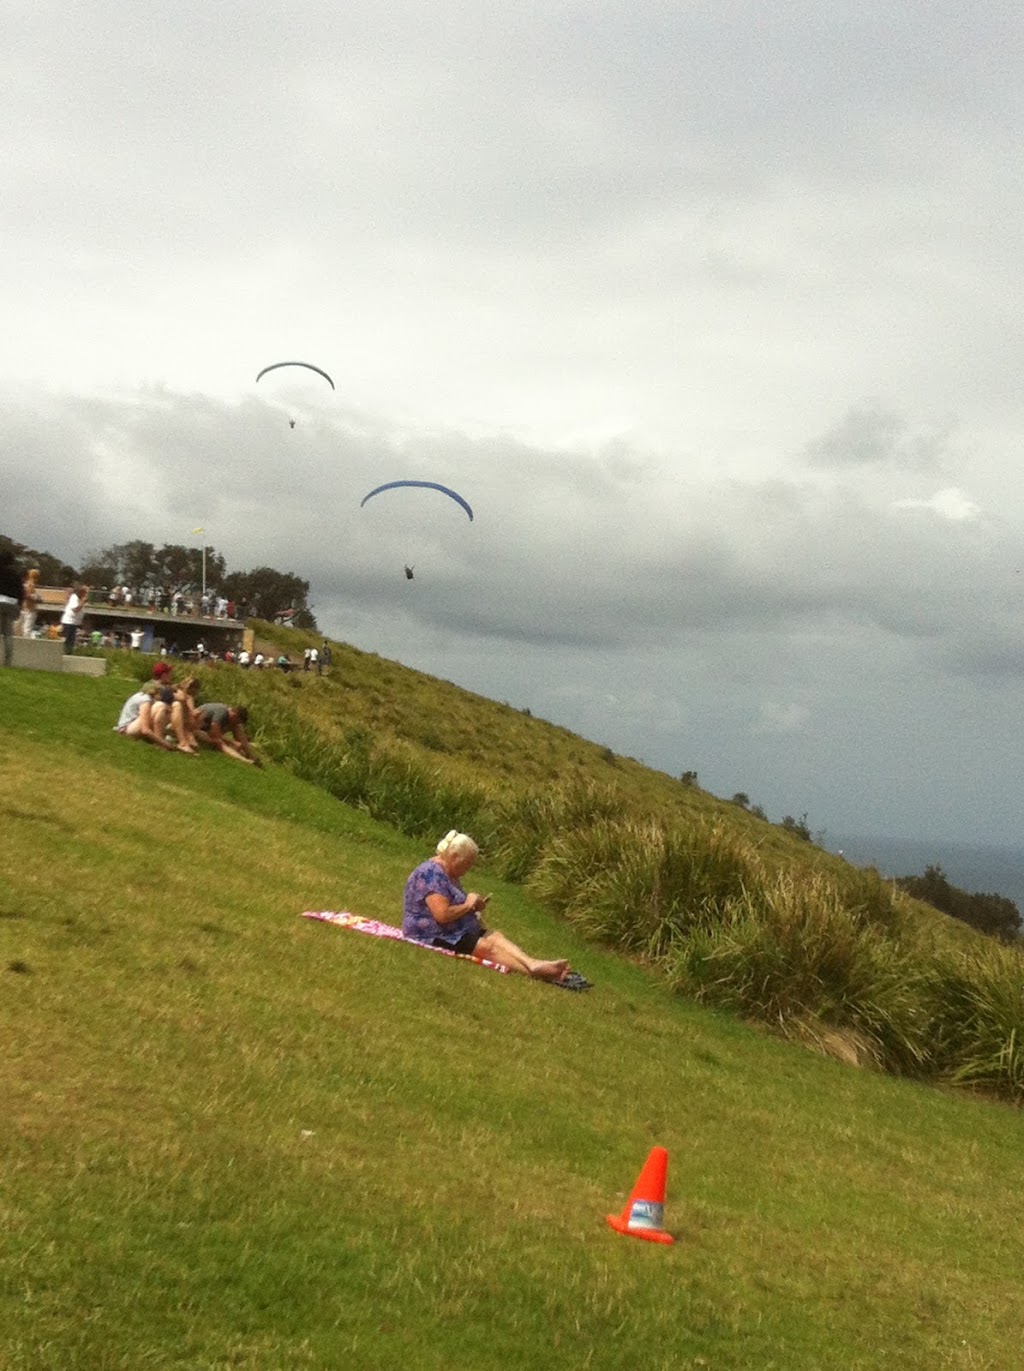 Sydney Hang Gliding Centre | university | Bald Hill Headland Reserve, Stanwell Tops NSW 2508, Australia | 0400258258 OR +61 400 258 258